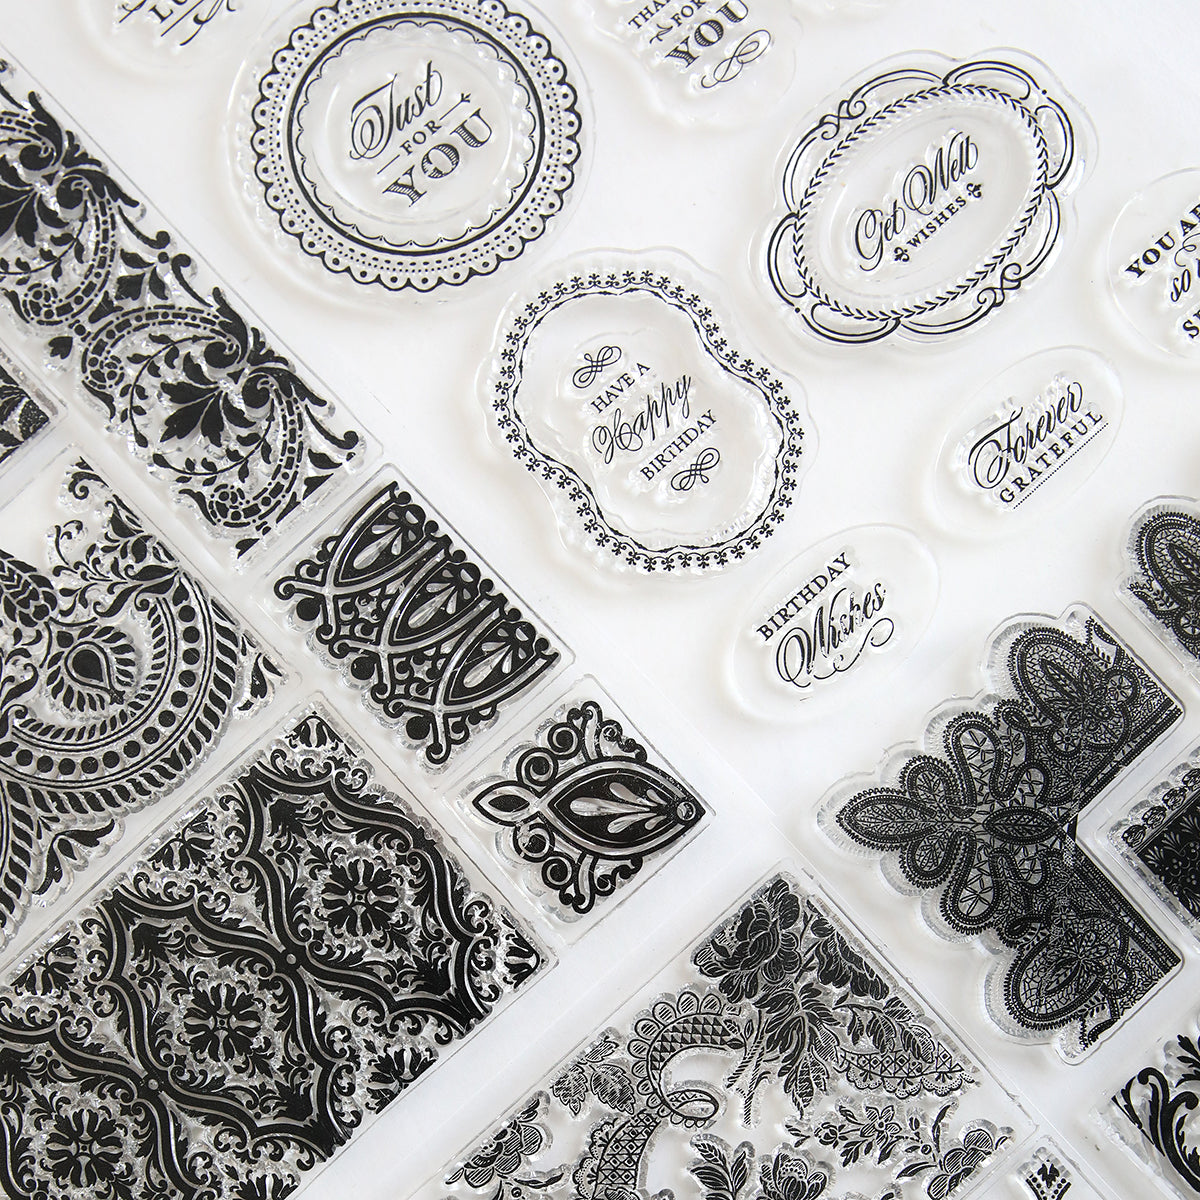 A collection of black and white stamps, including the Anniversary Stamp Set.